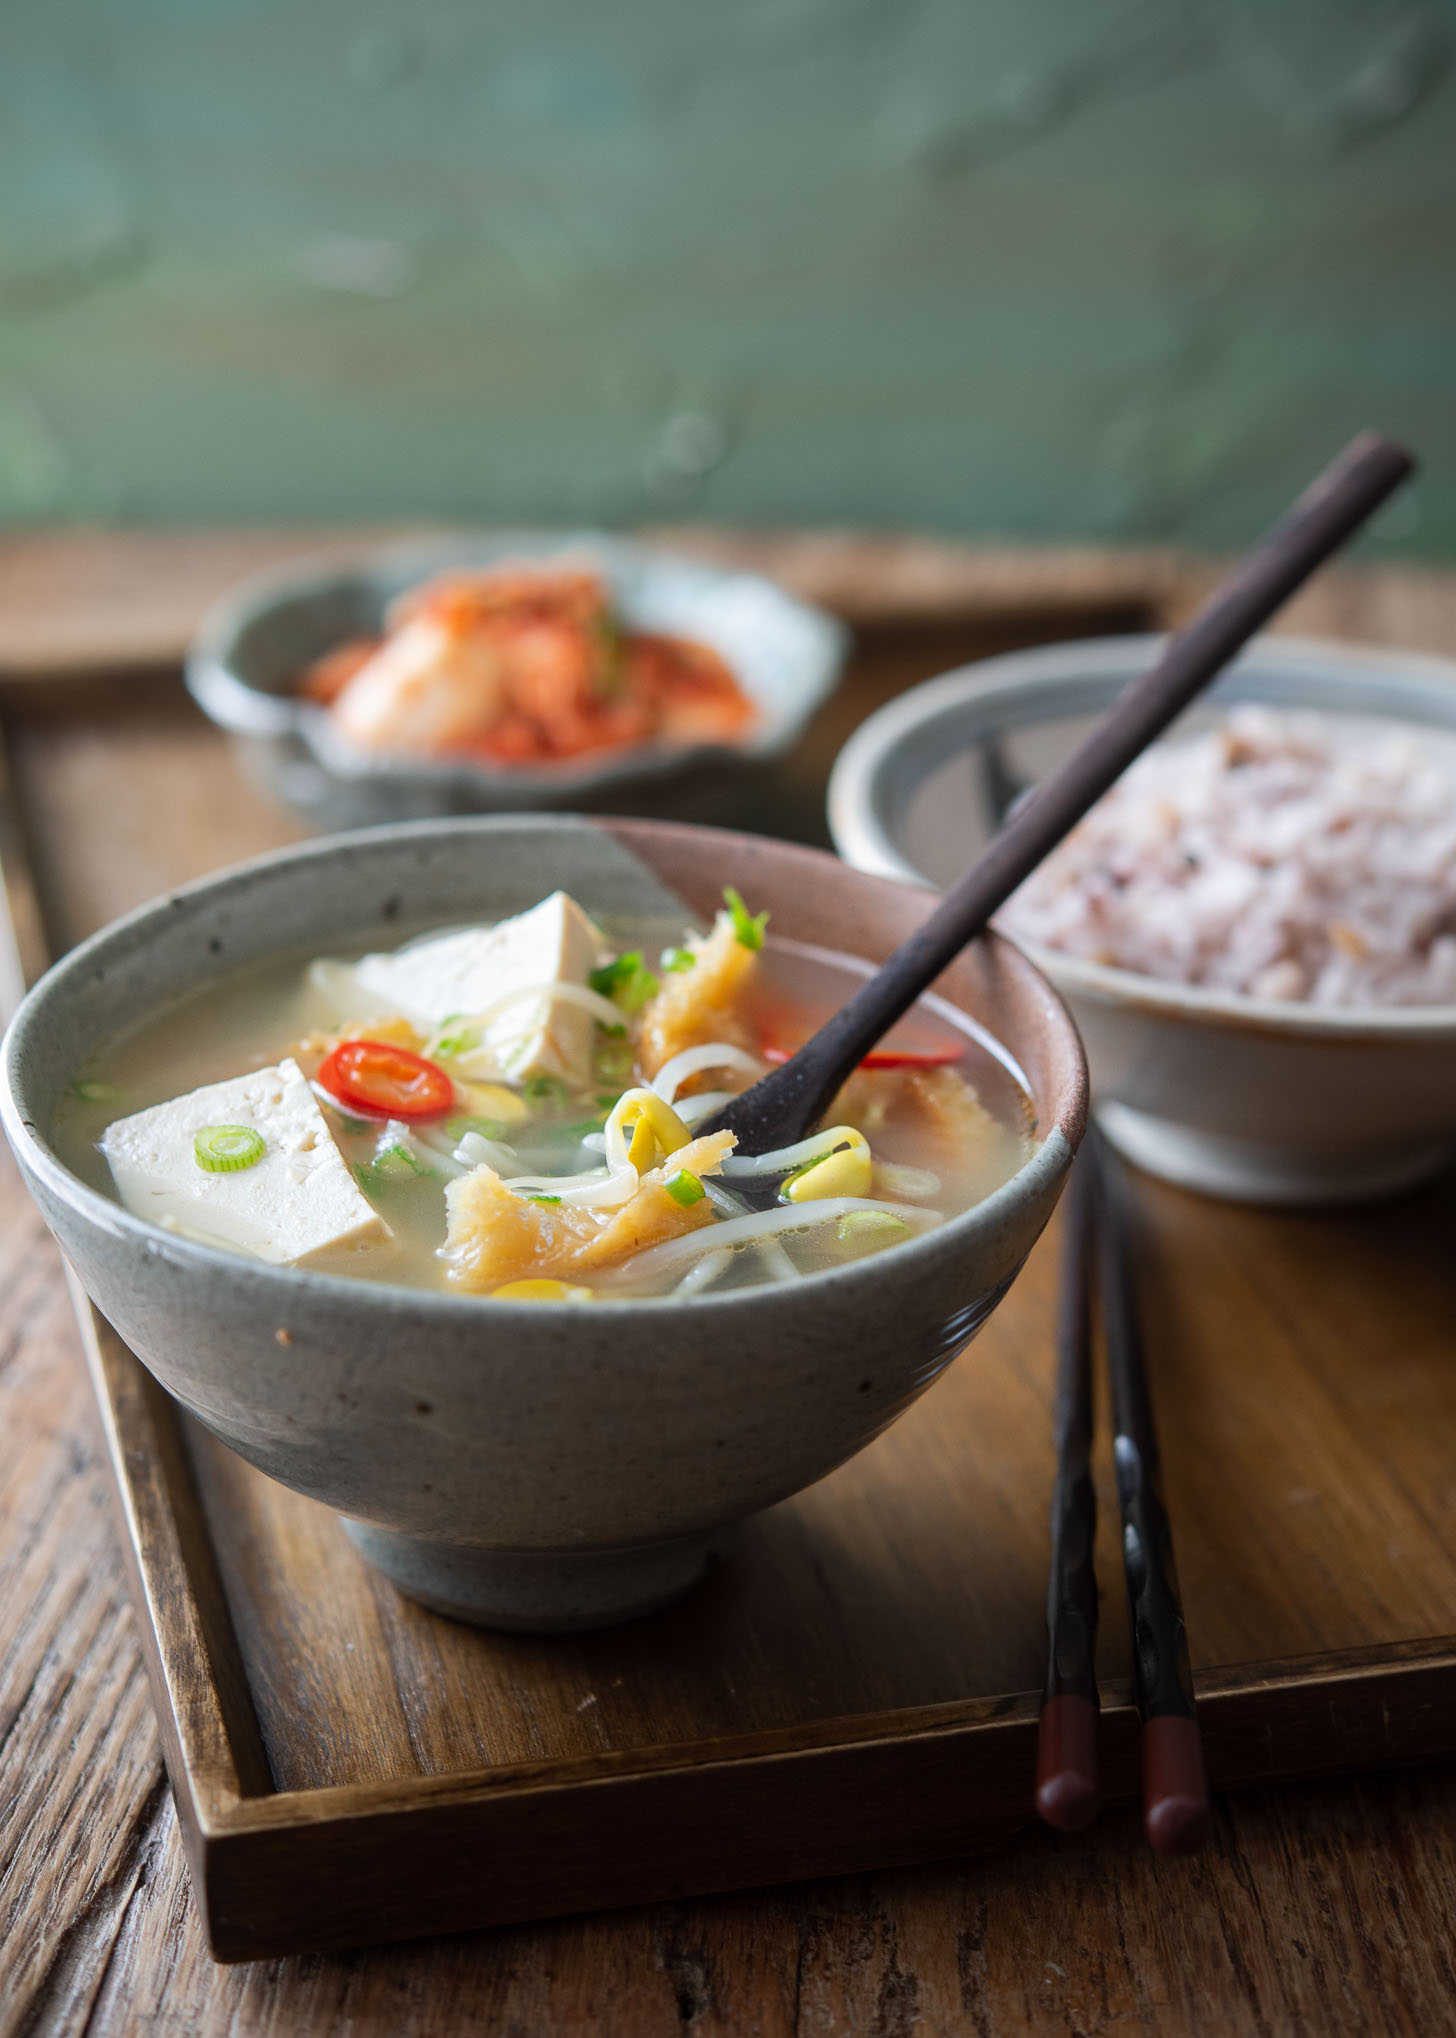 Korean pollock soup is served with rice and kimchi.